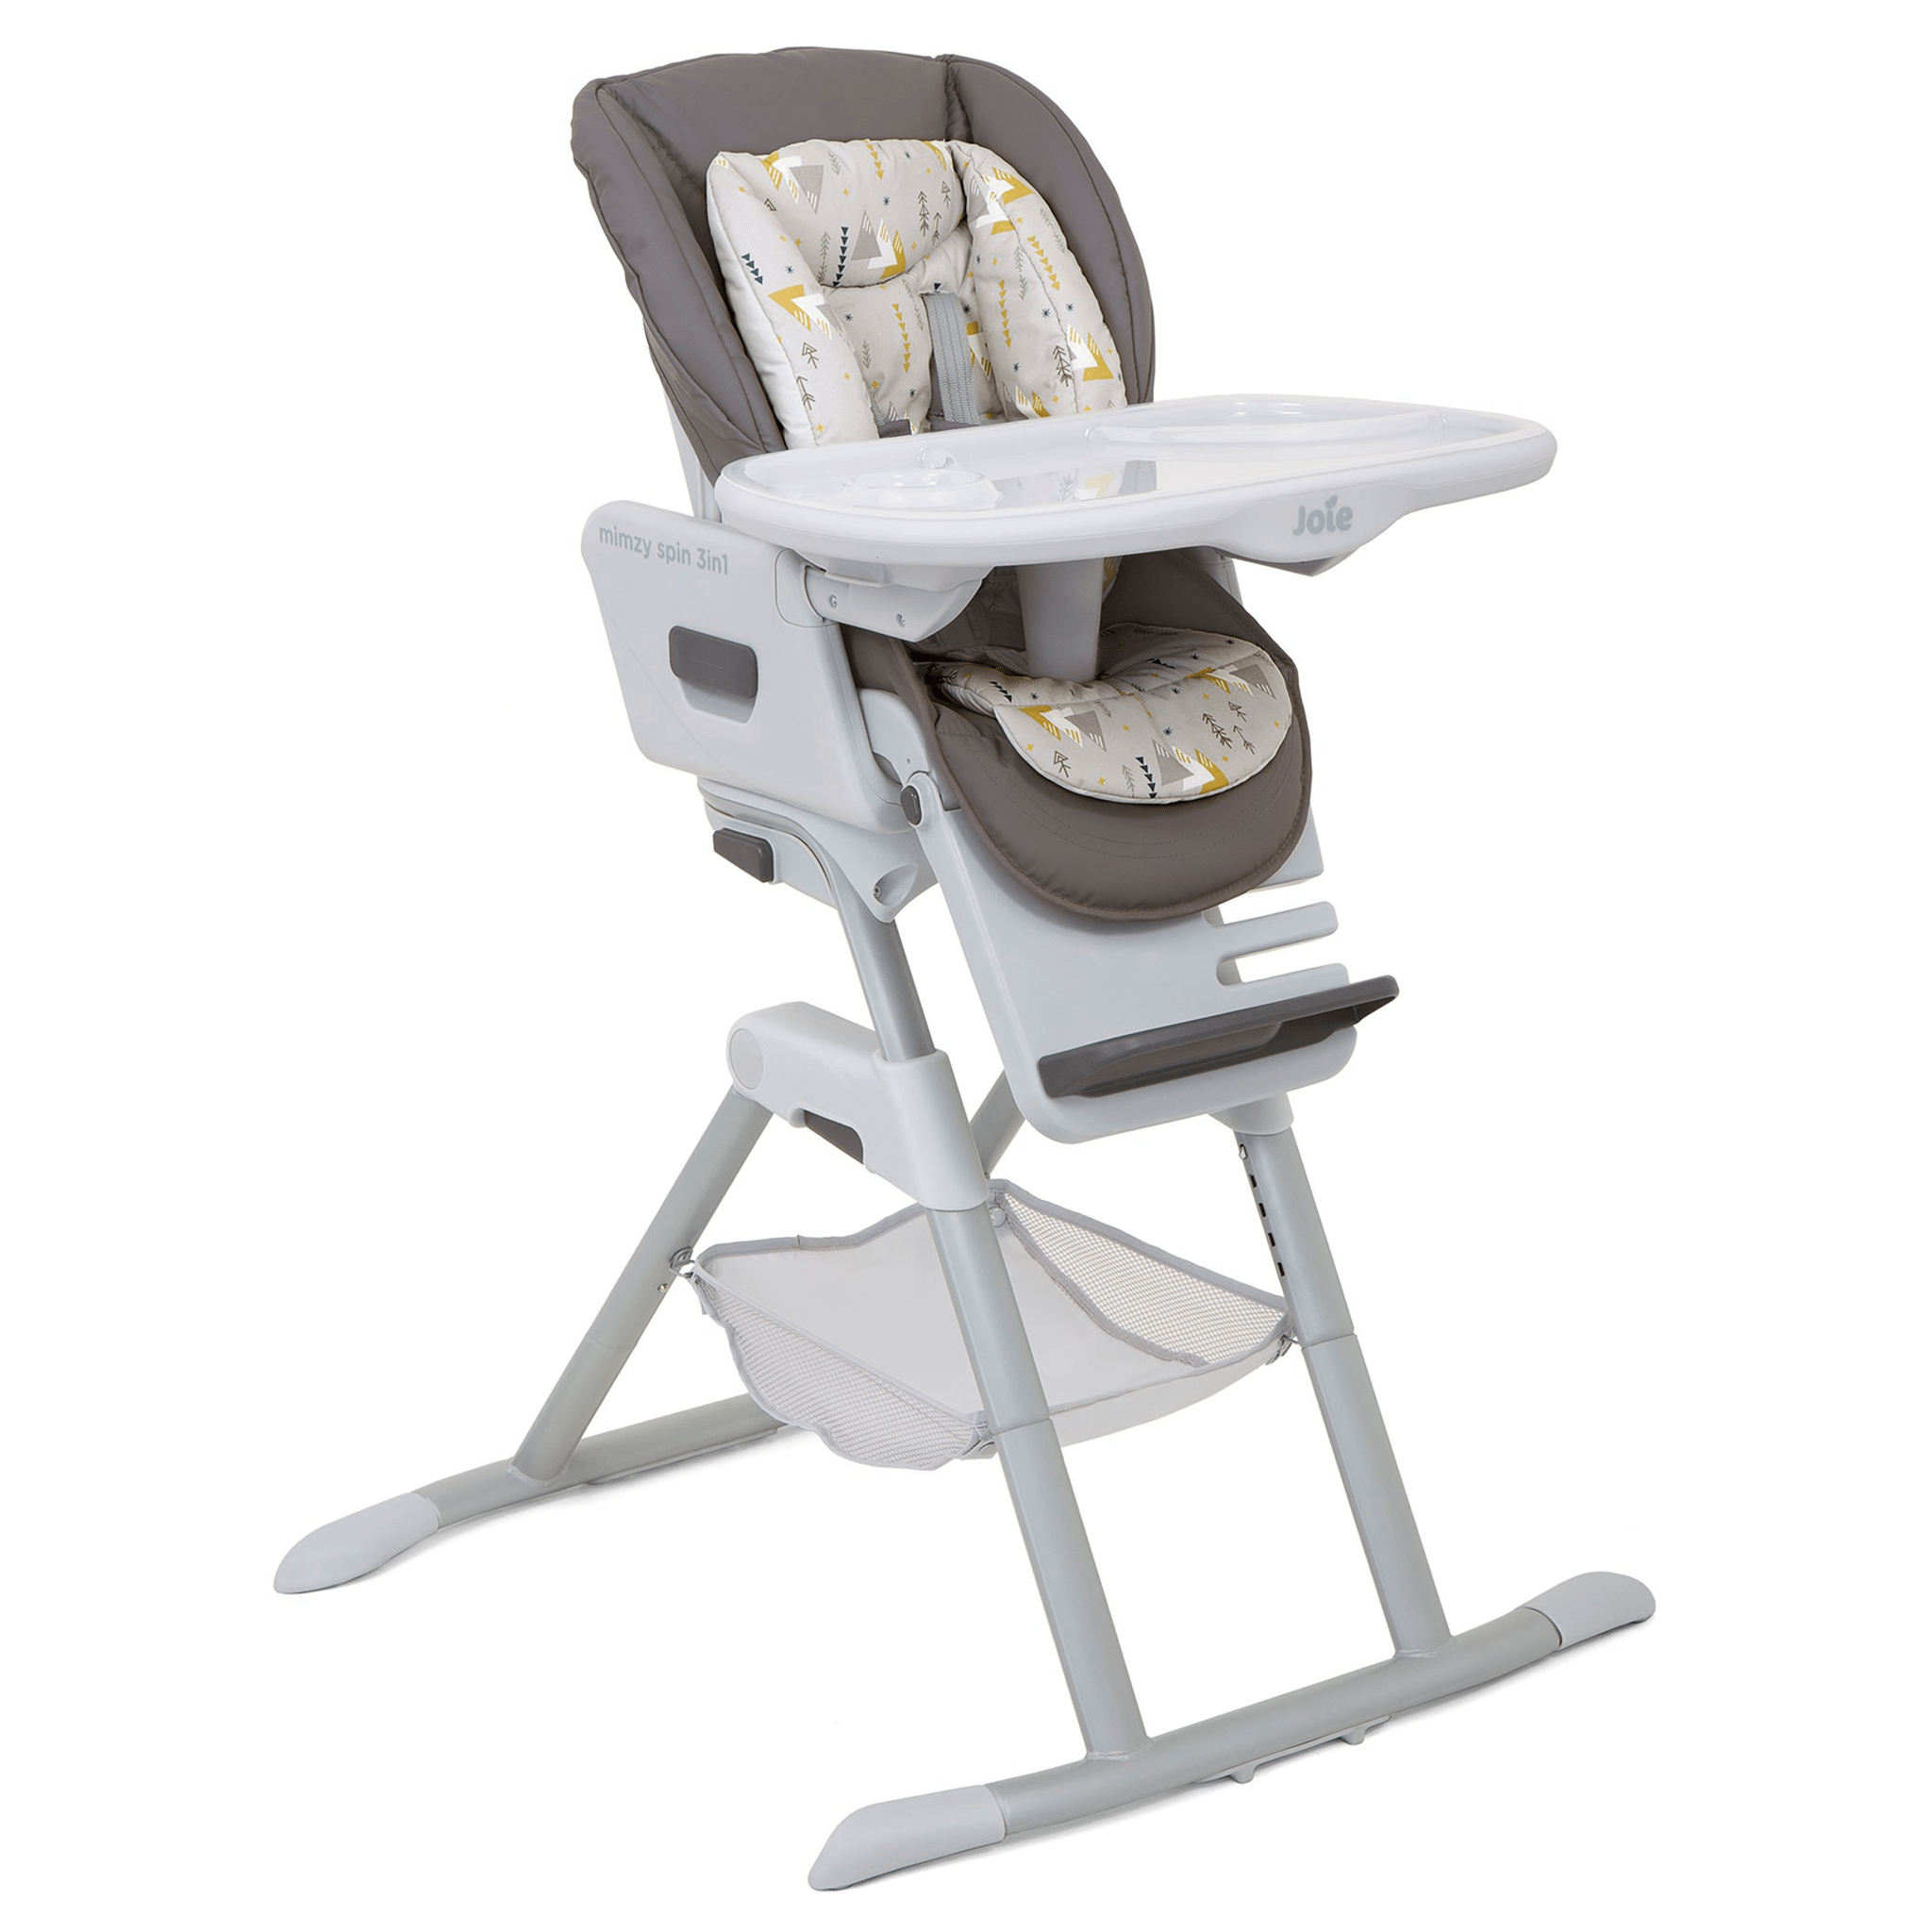 Joie baby highchairs Joie Mimzy Spin 3in1 Highchair - Geometric Mountains H1124BAGEM000